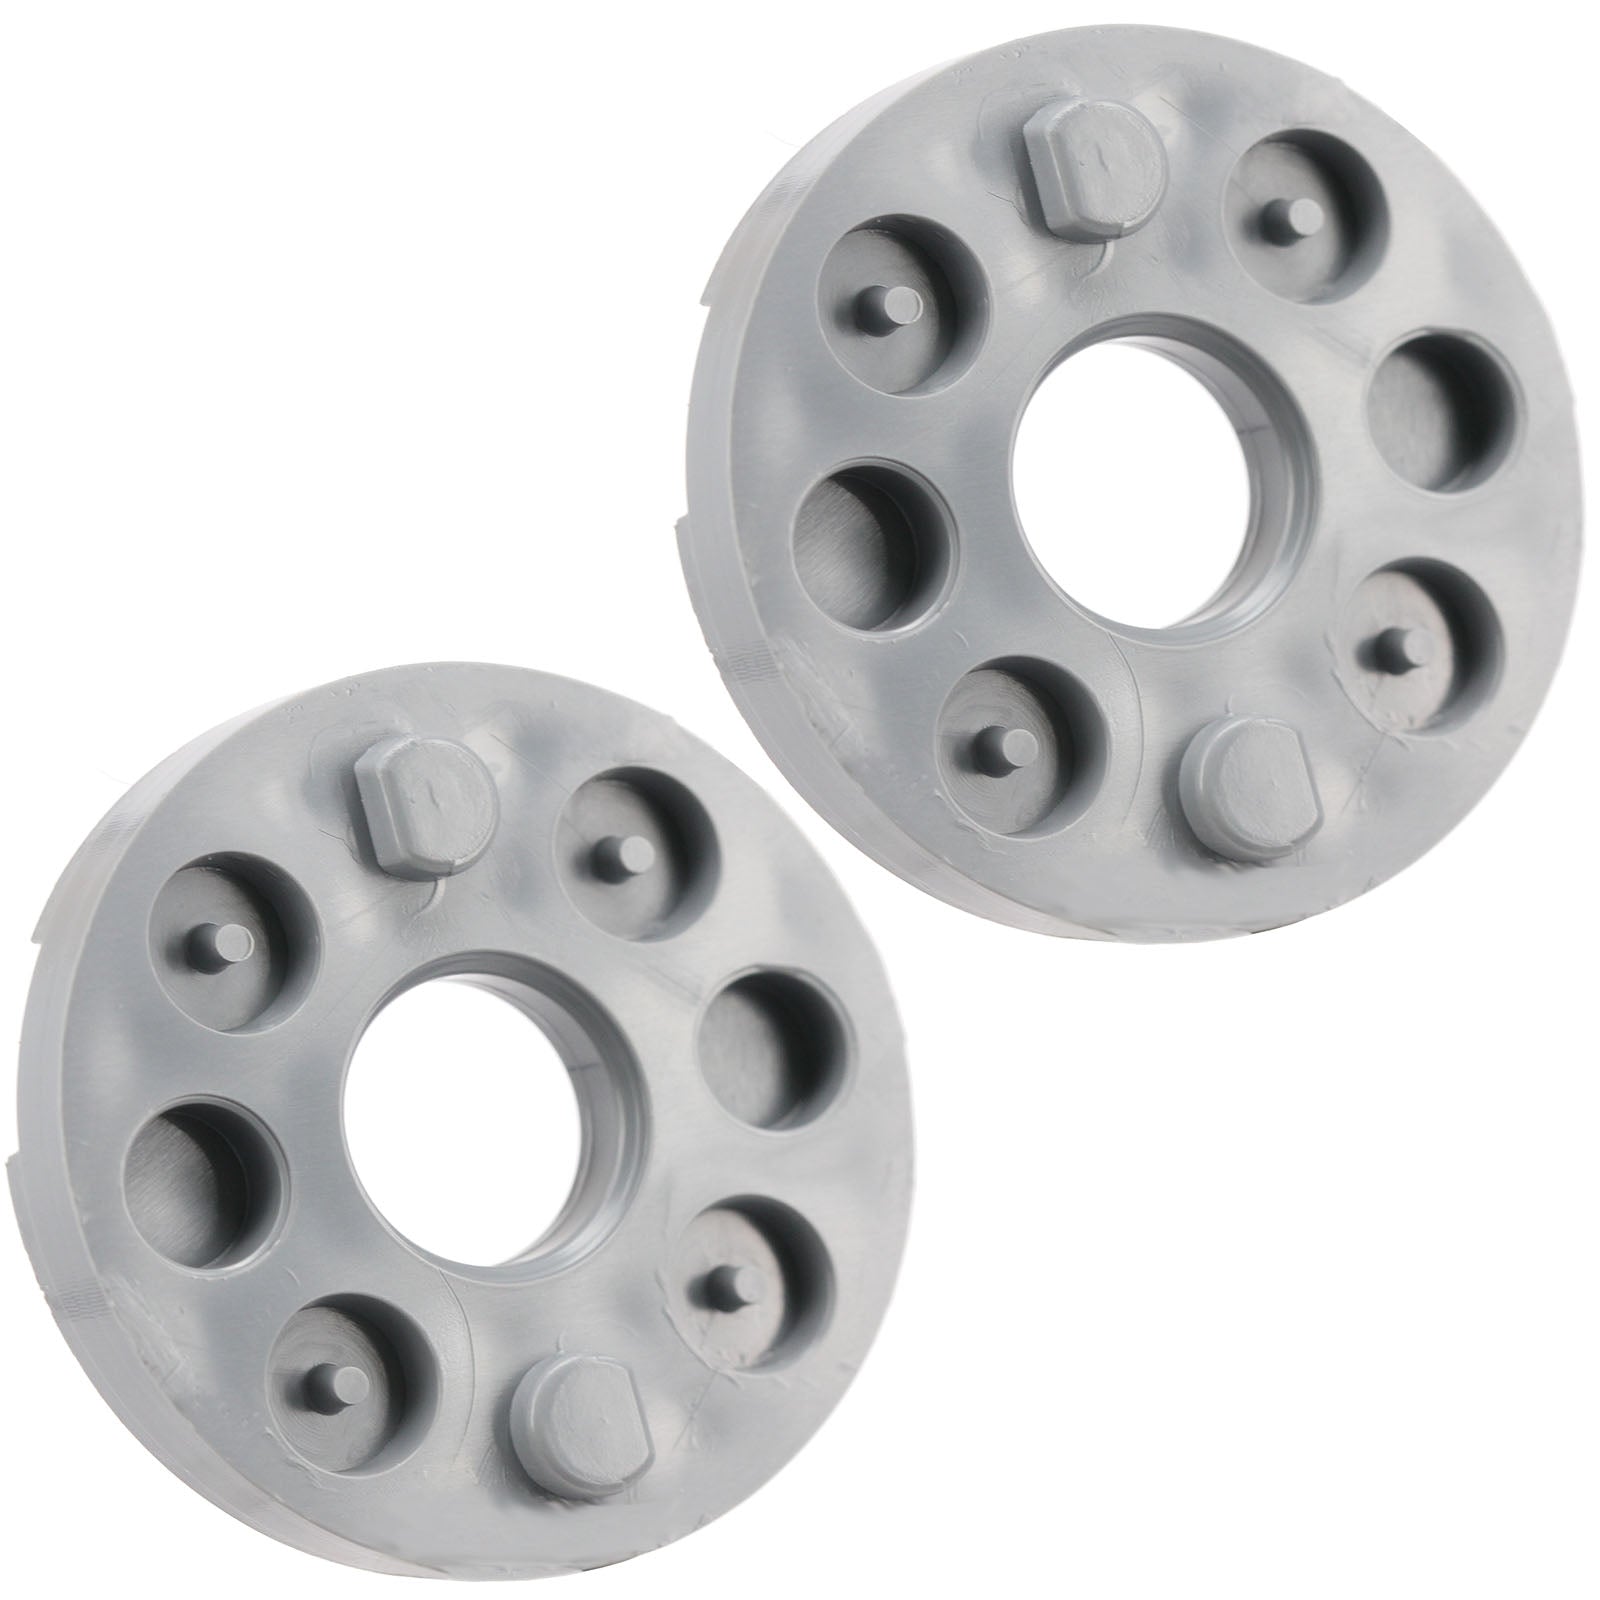 Blade Height Spacers for FLYMO Turbolite Vision Compact 330 350 380 400 Lawnmower x 2